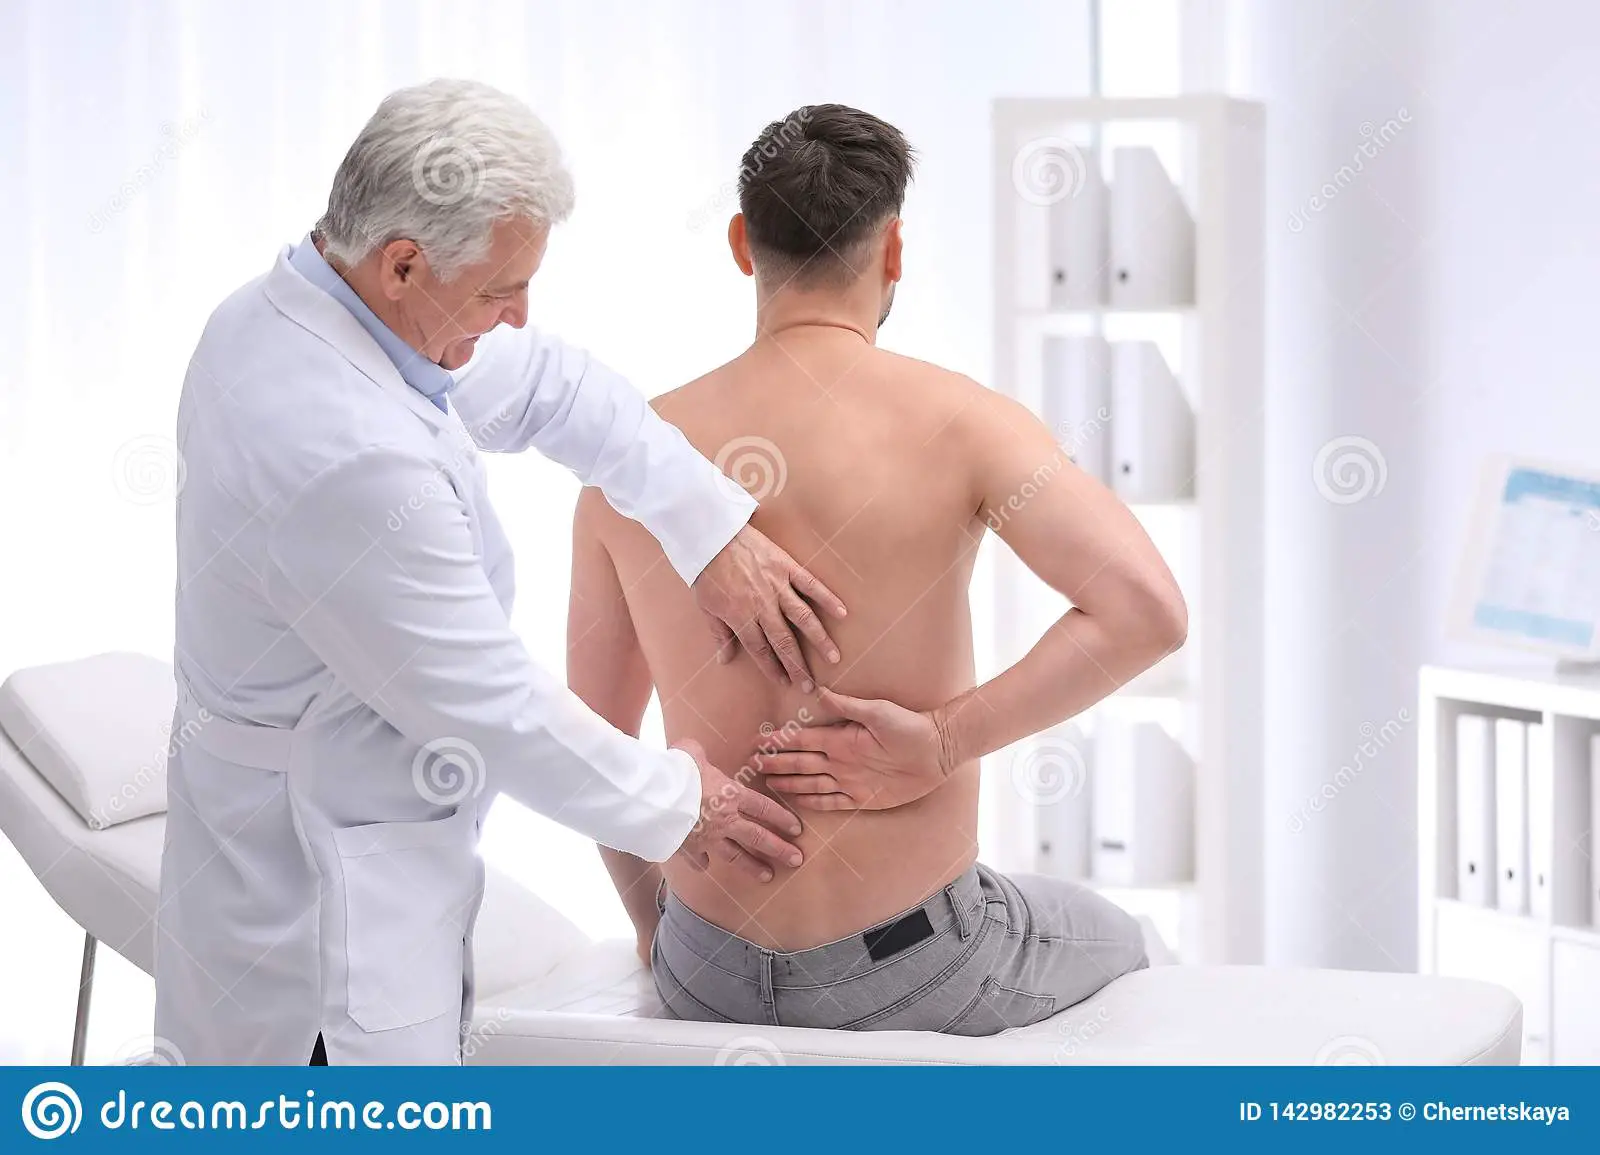 Chiropractor Examining Patient With Back Pain Stock Image